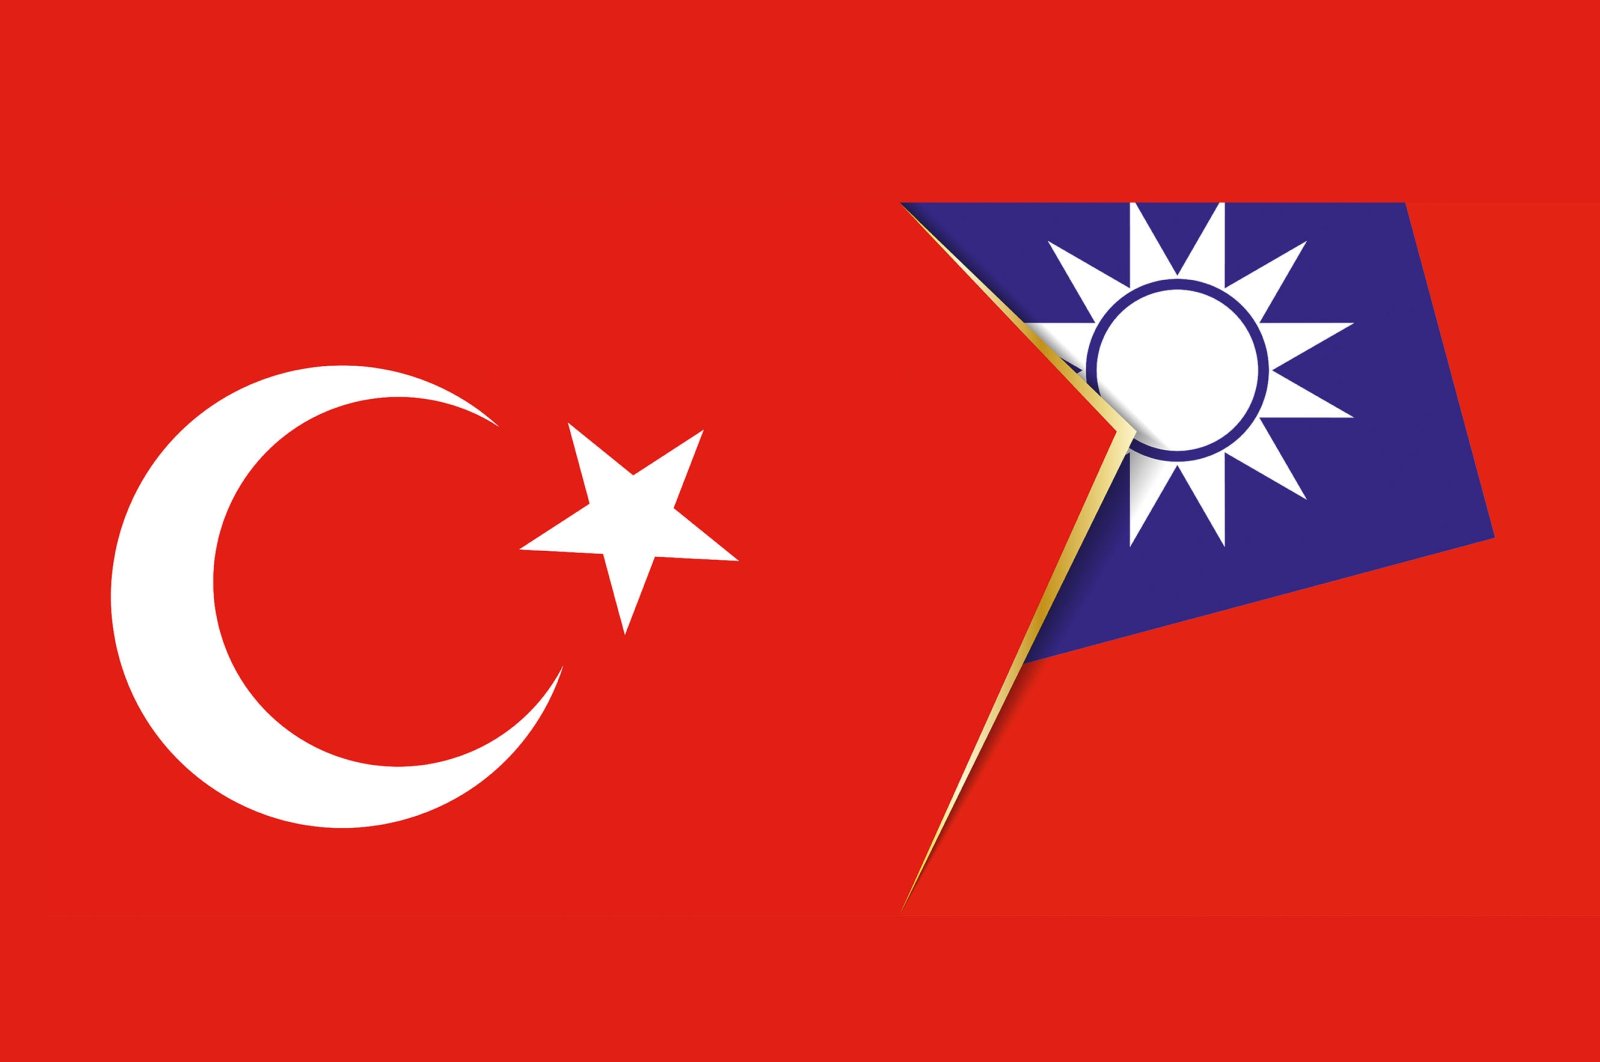 The flags of Turkey and Taiwan. (Shutterstock Photo)